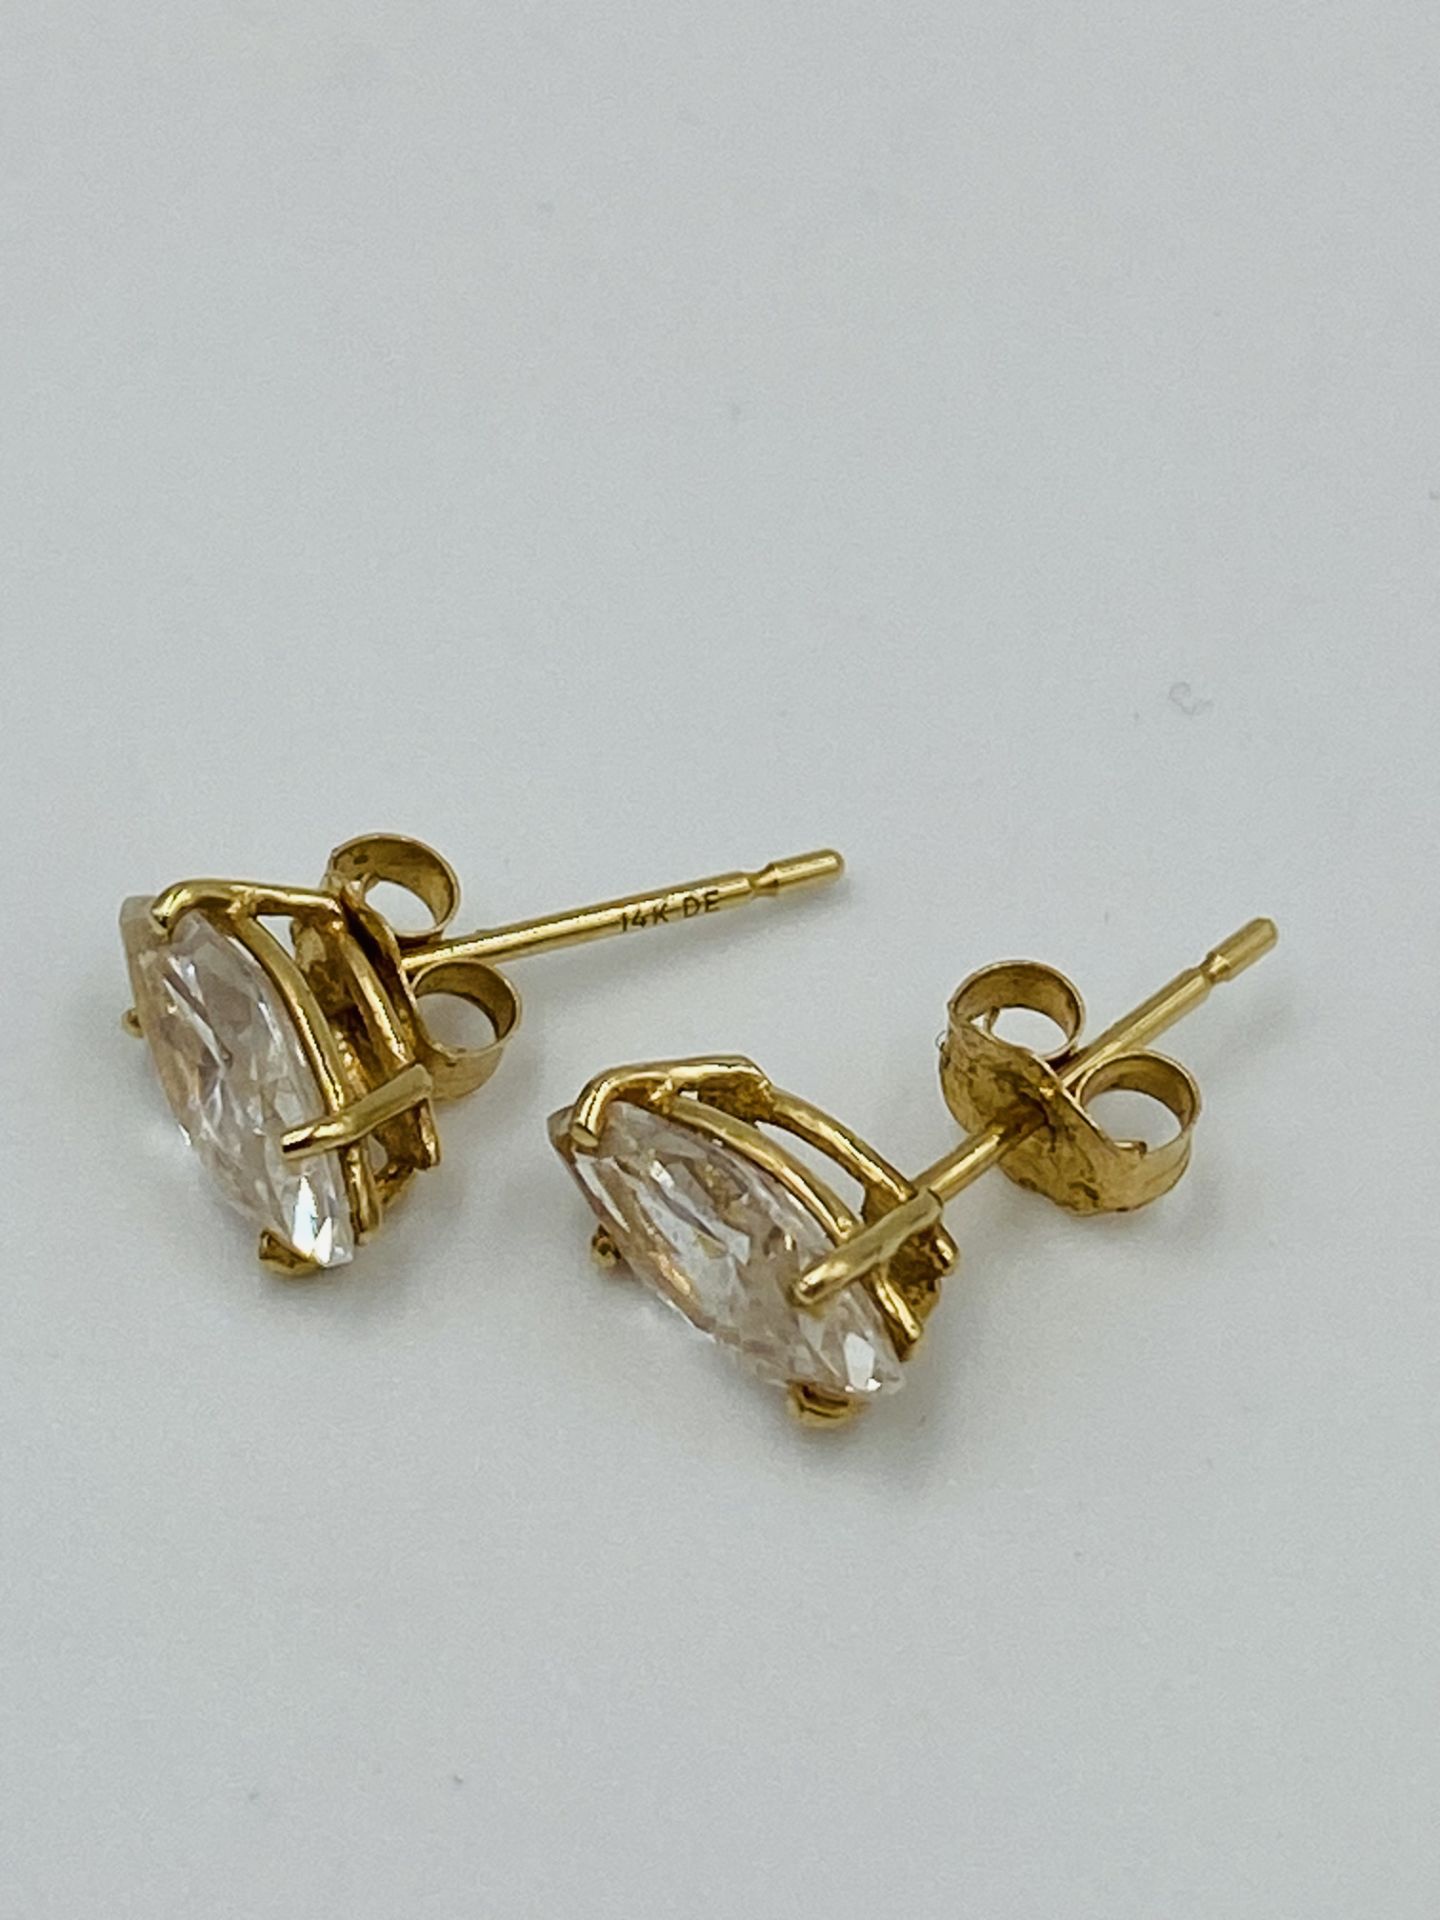 Pair of 14ct gold earrings set with a white stone - Image 4 of 4